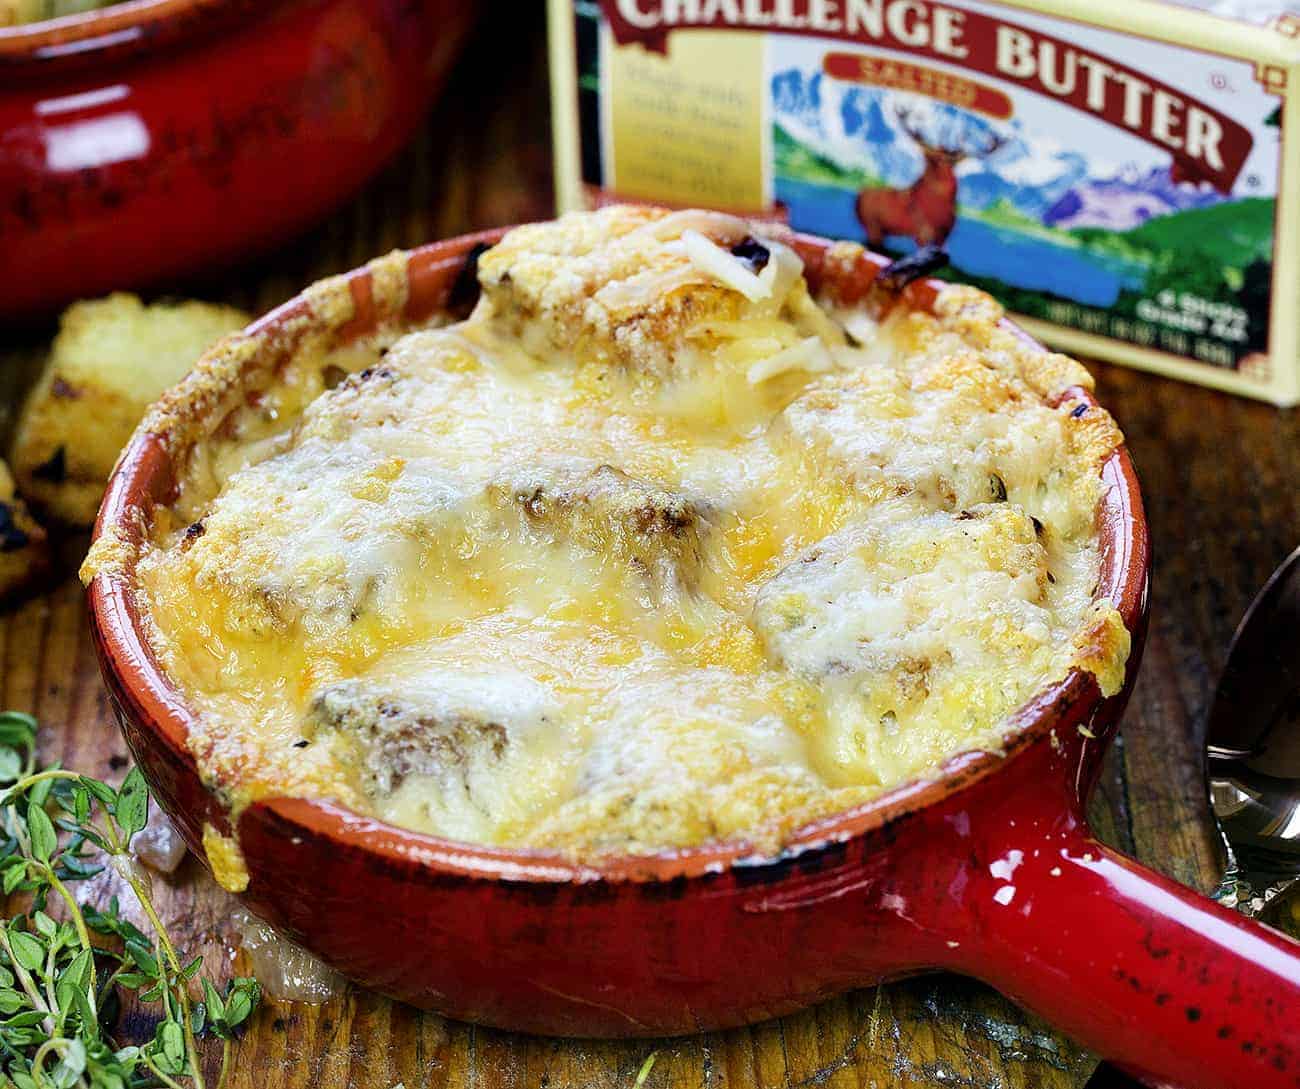 A Gourmet Twist on French Onion Soup